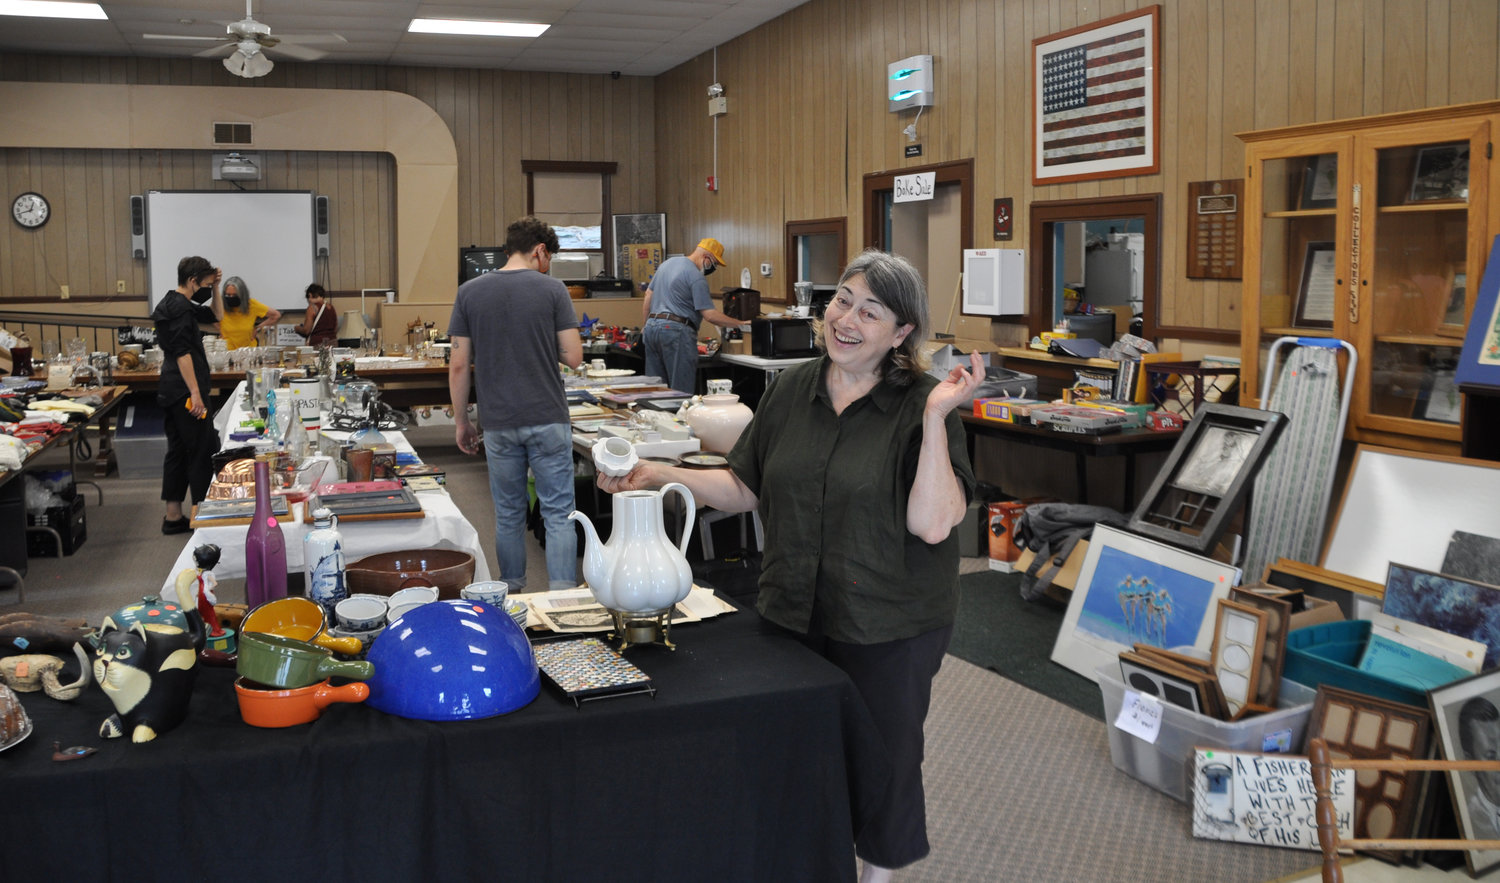 Sunshine Hall Library board member Leslie Rutkin lit up the Town Hall with her "happy face" at the Treasure and Trinket sale held in Eldred, NY last weekend benefiting the library